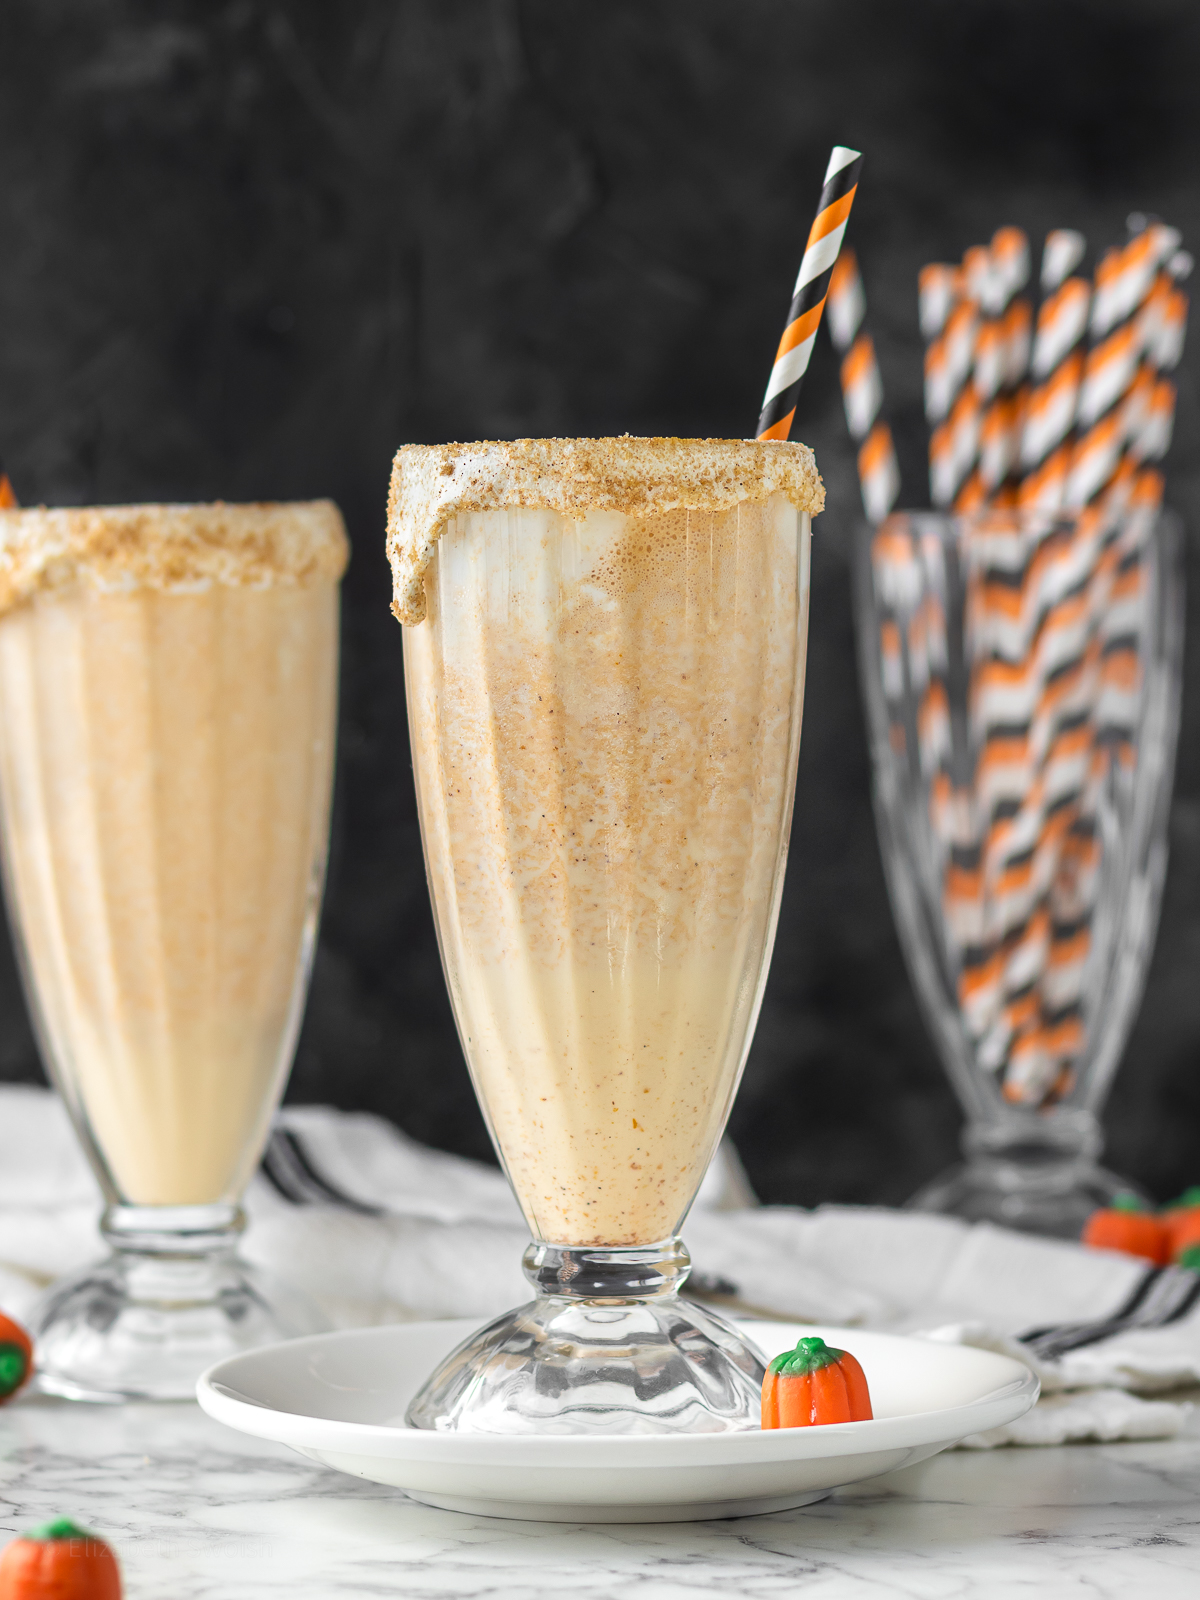 Two tall glasses of Marshmallow Pumpkin Milkshake with a orange and black striped straw and mini pumpkin candies on the side.